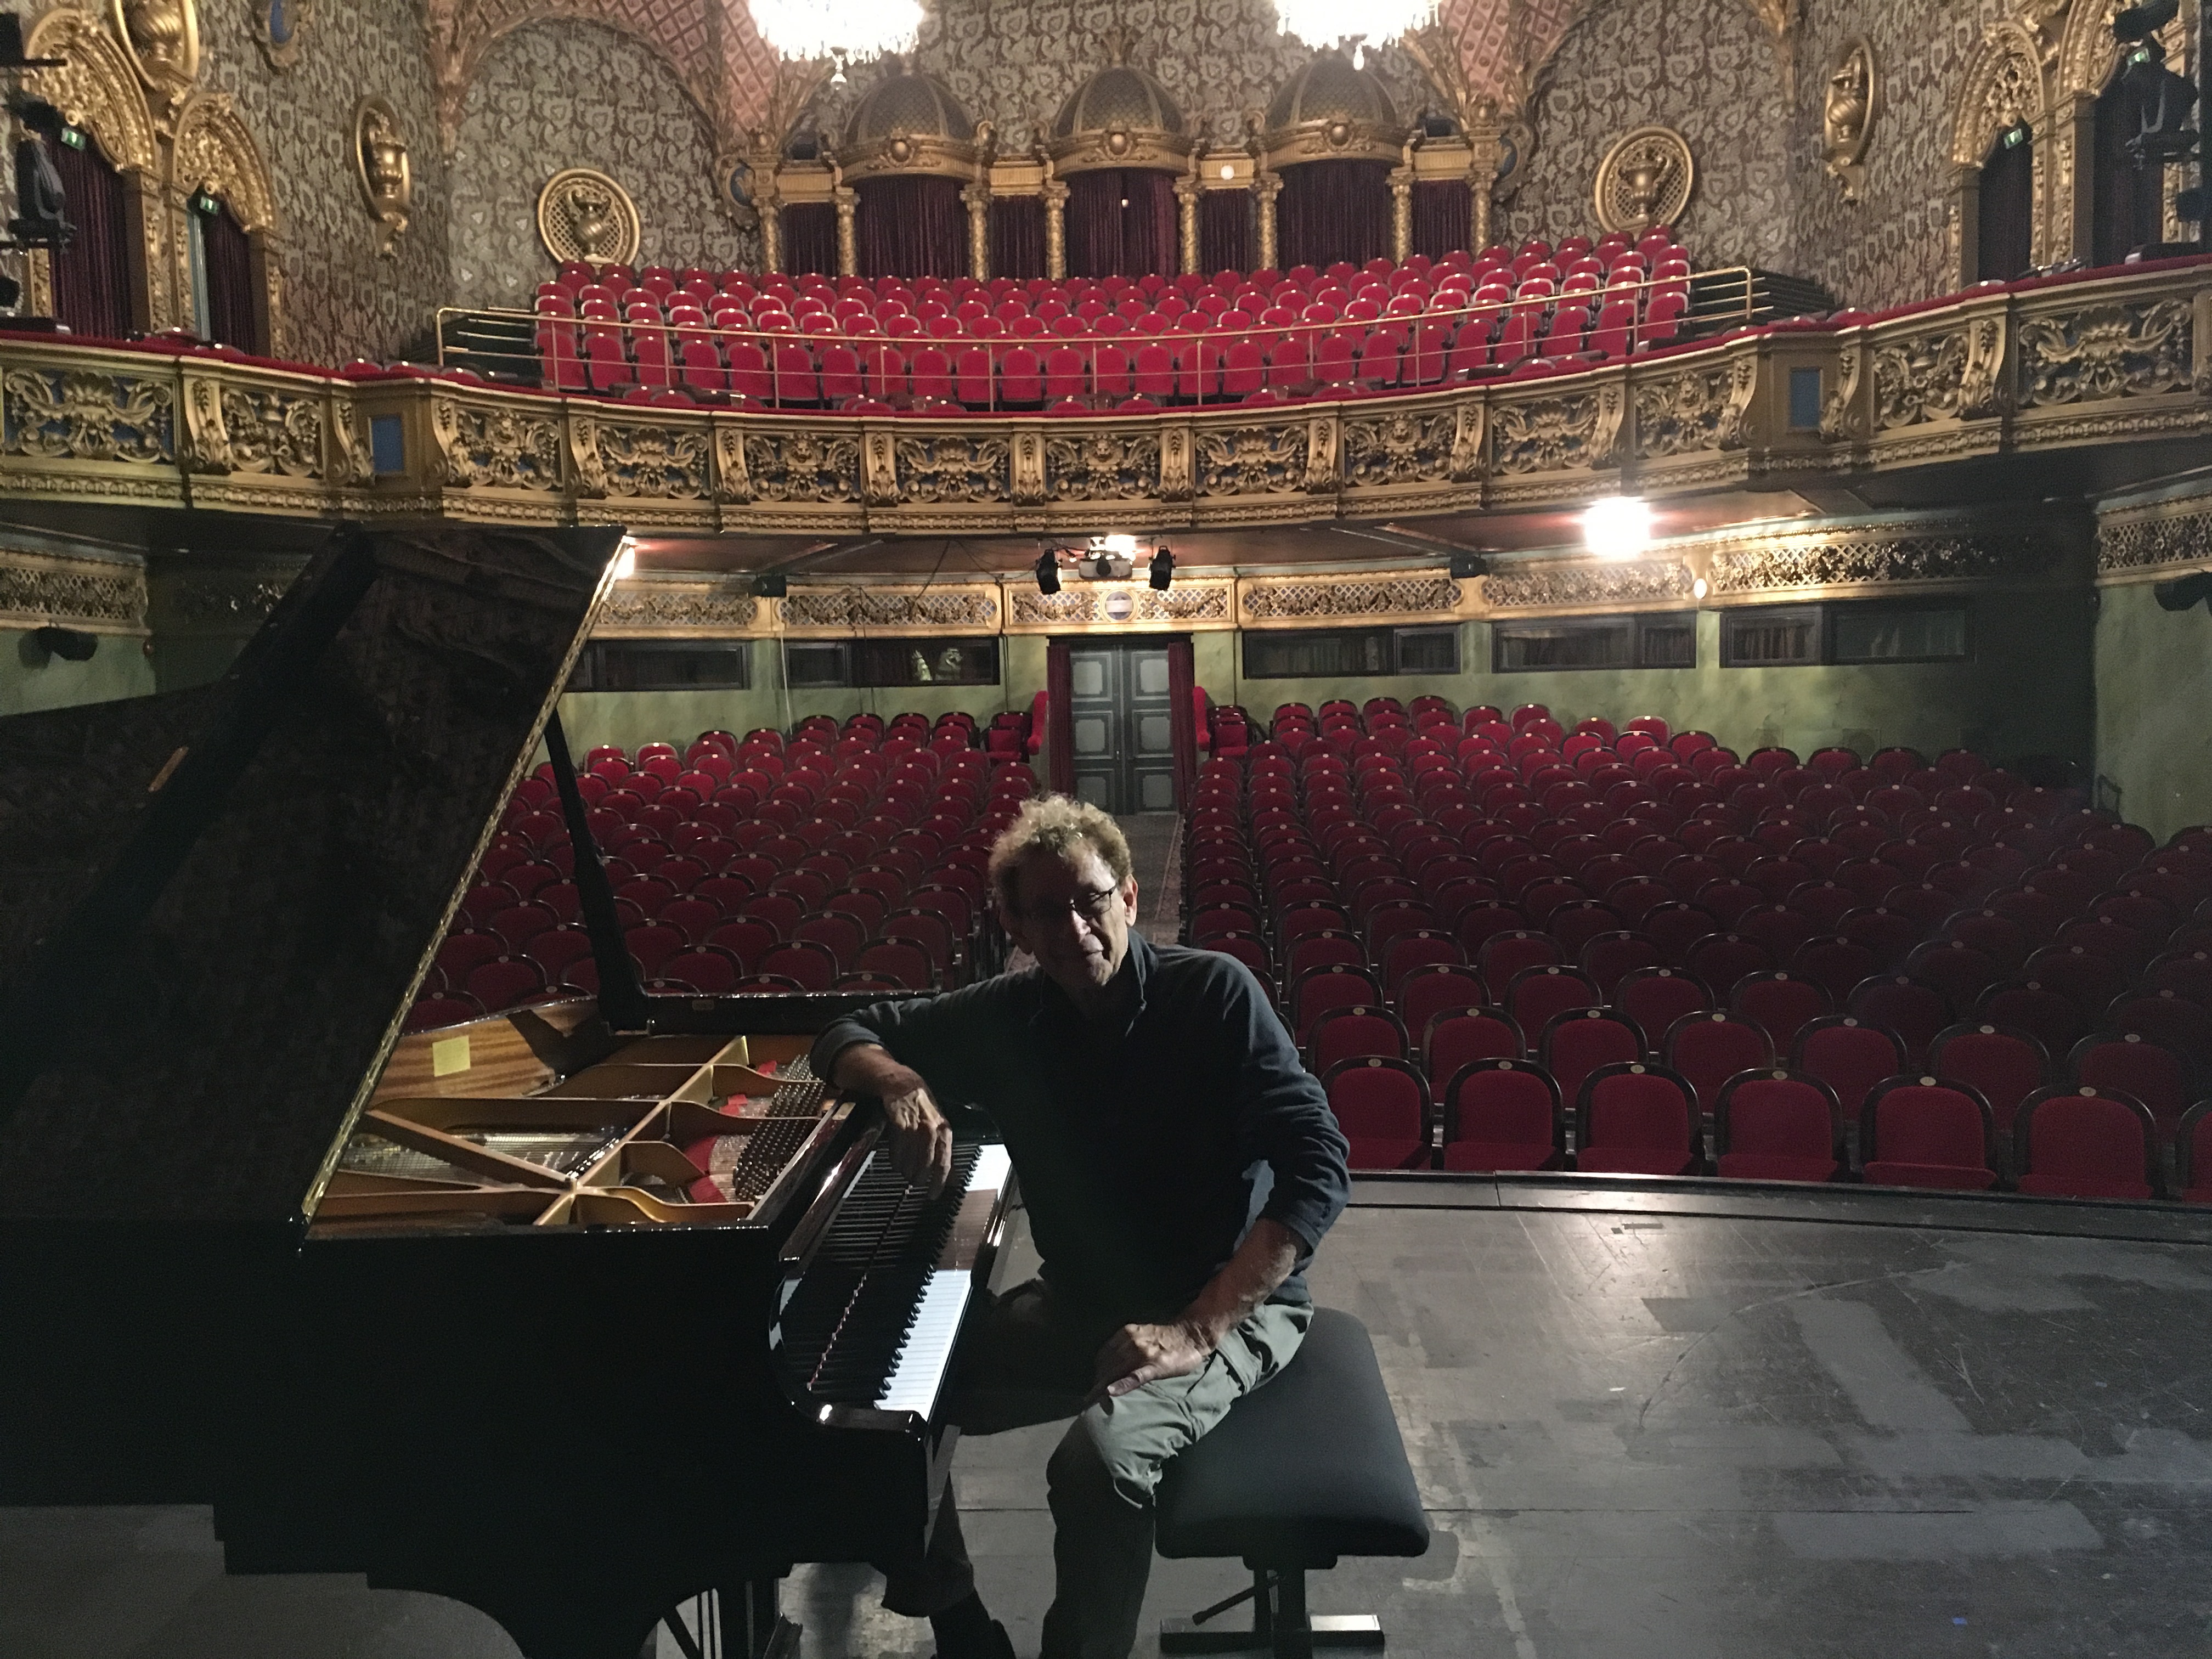 In rehearsal before evening concert in Tallinn, Estonia and the other one …in rehearsal before evening concert in the Mariinsky Concert Hall, St. Petersburg, Russia